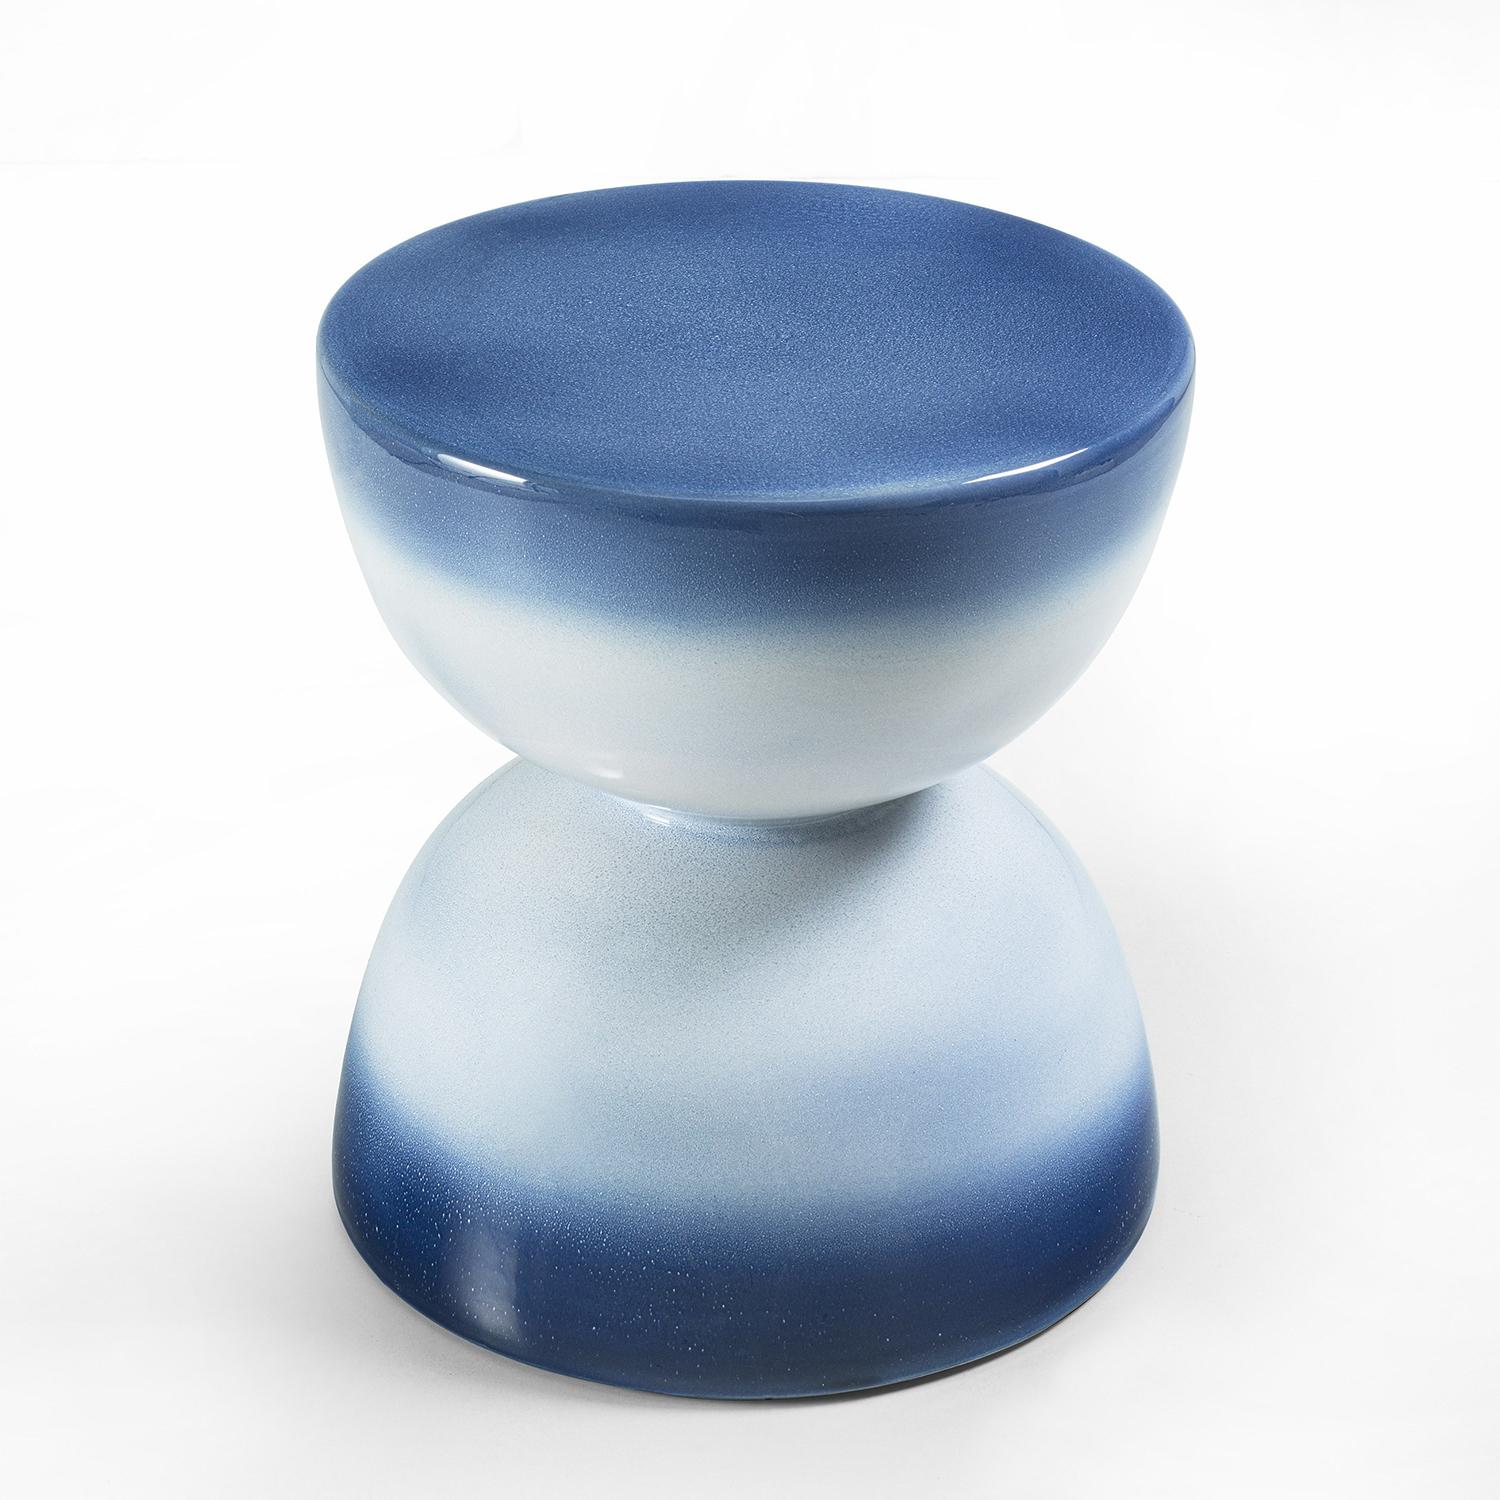 Ceramic Spheres Shaded Blue Stool For Sale